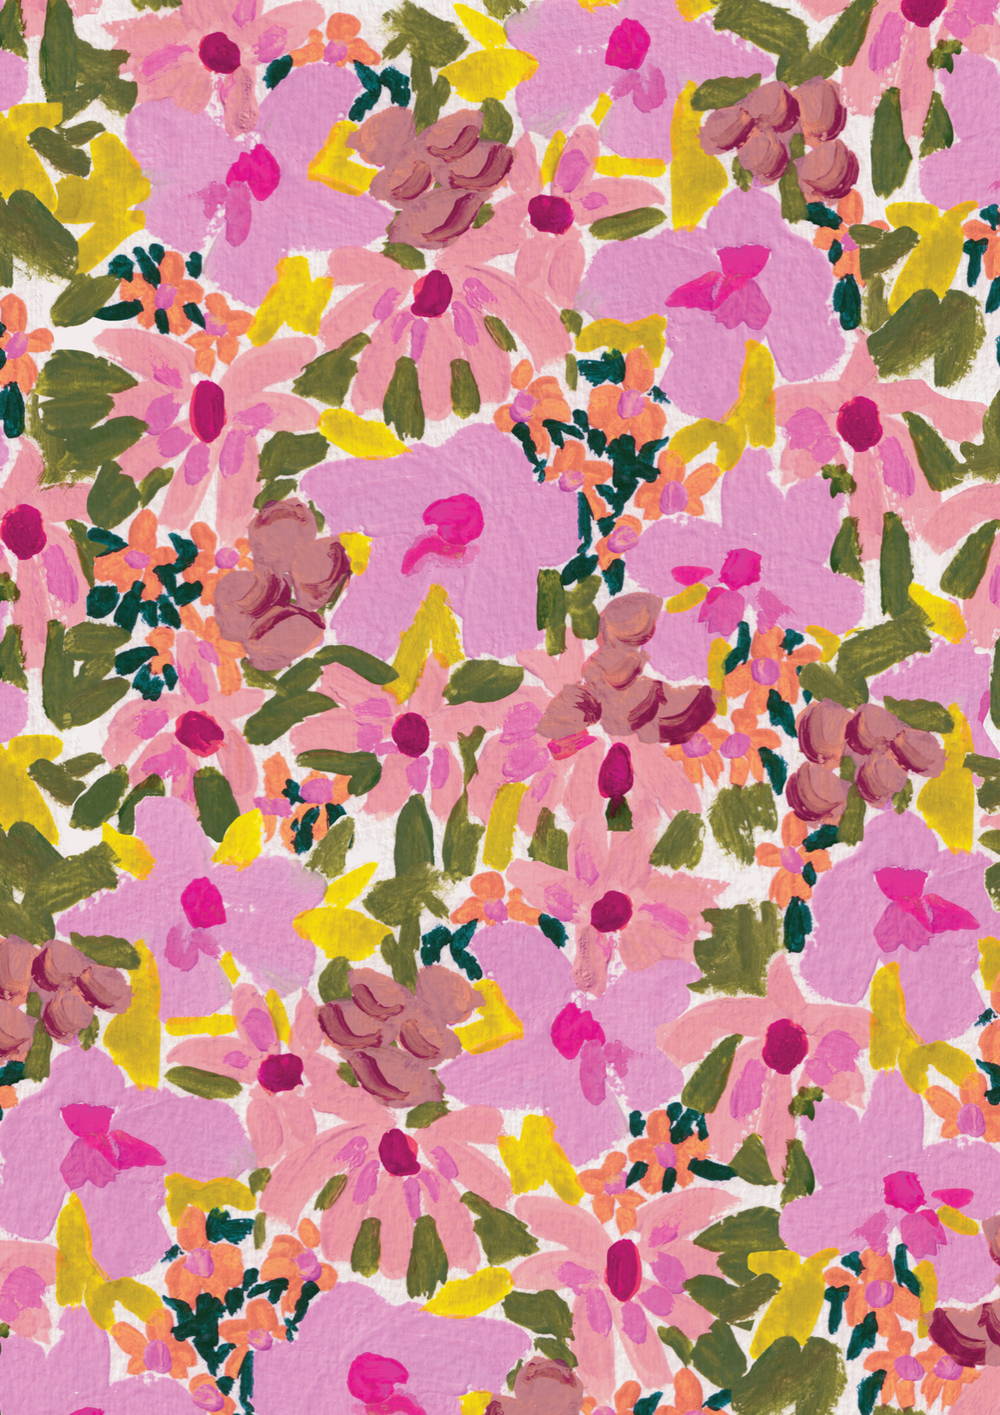 Candice-gray-textile-designer-abstract-brushstroke-ditsy-floral-print-a3-pink-yellow-green-purple